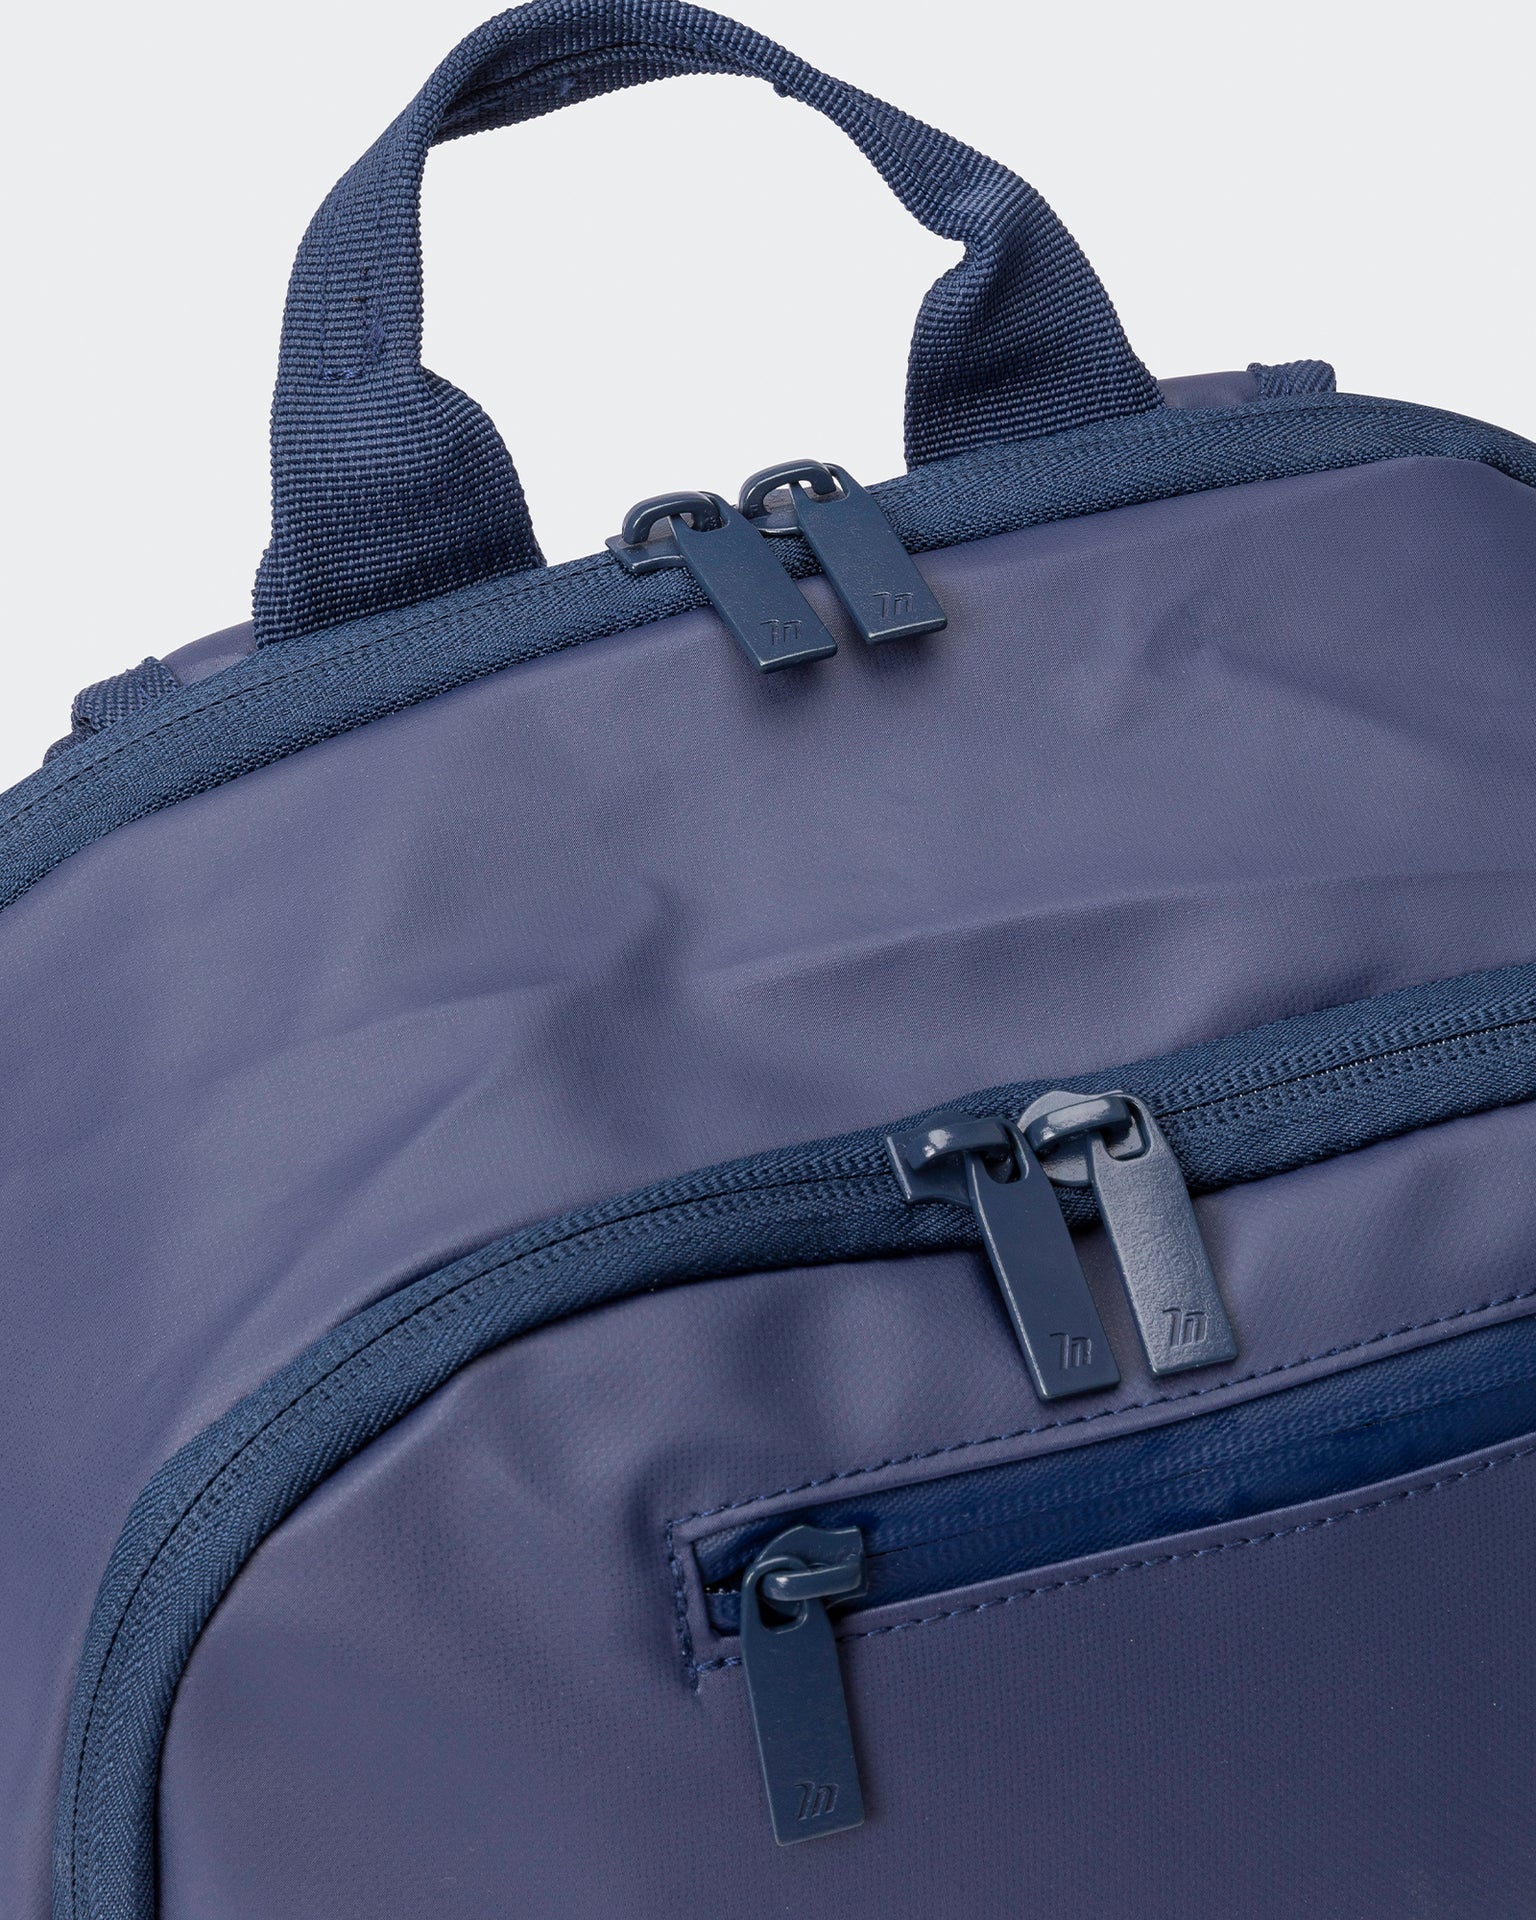 Muscle Nation Bags Default Backpack - Navy